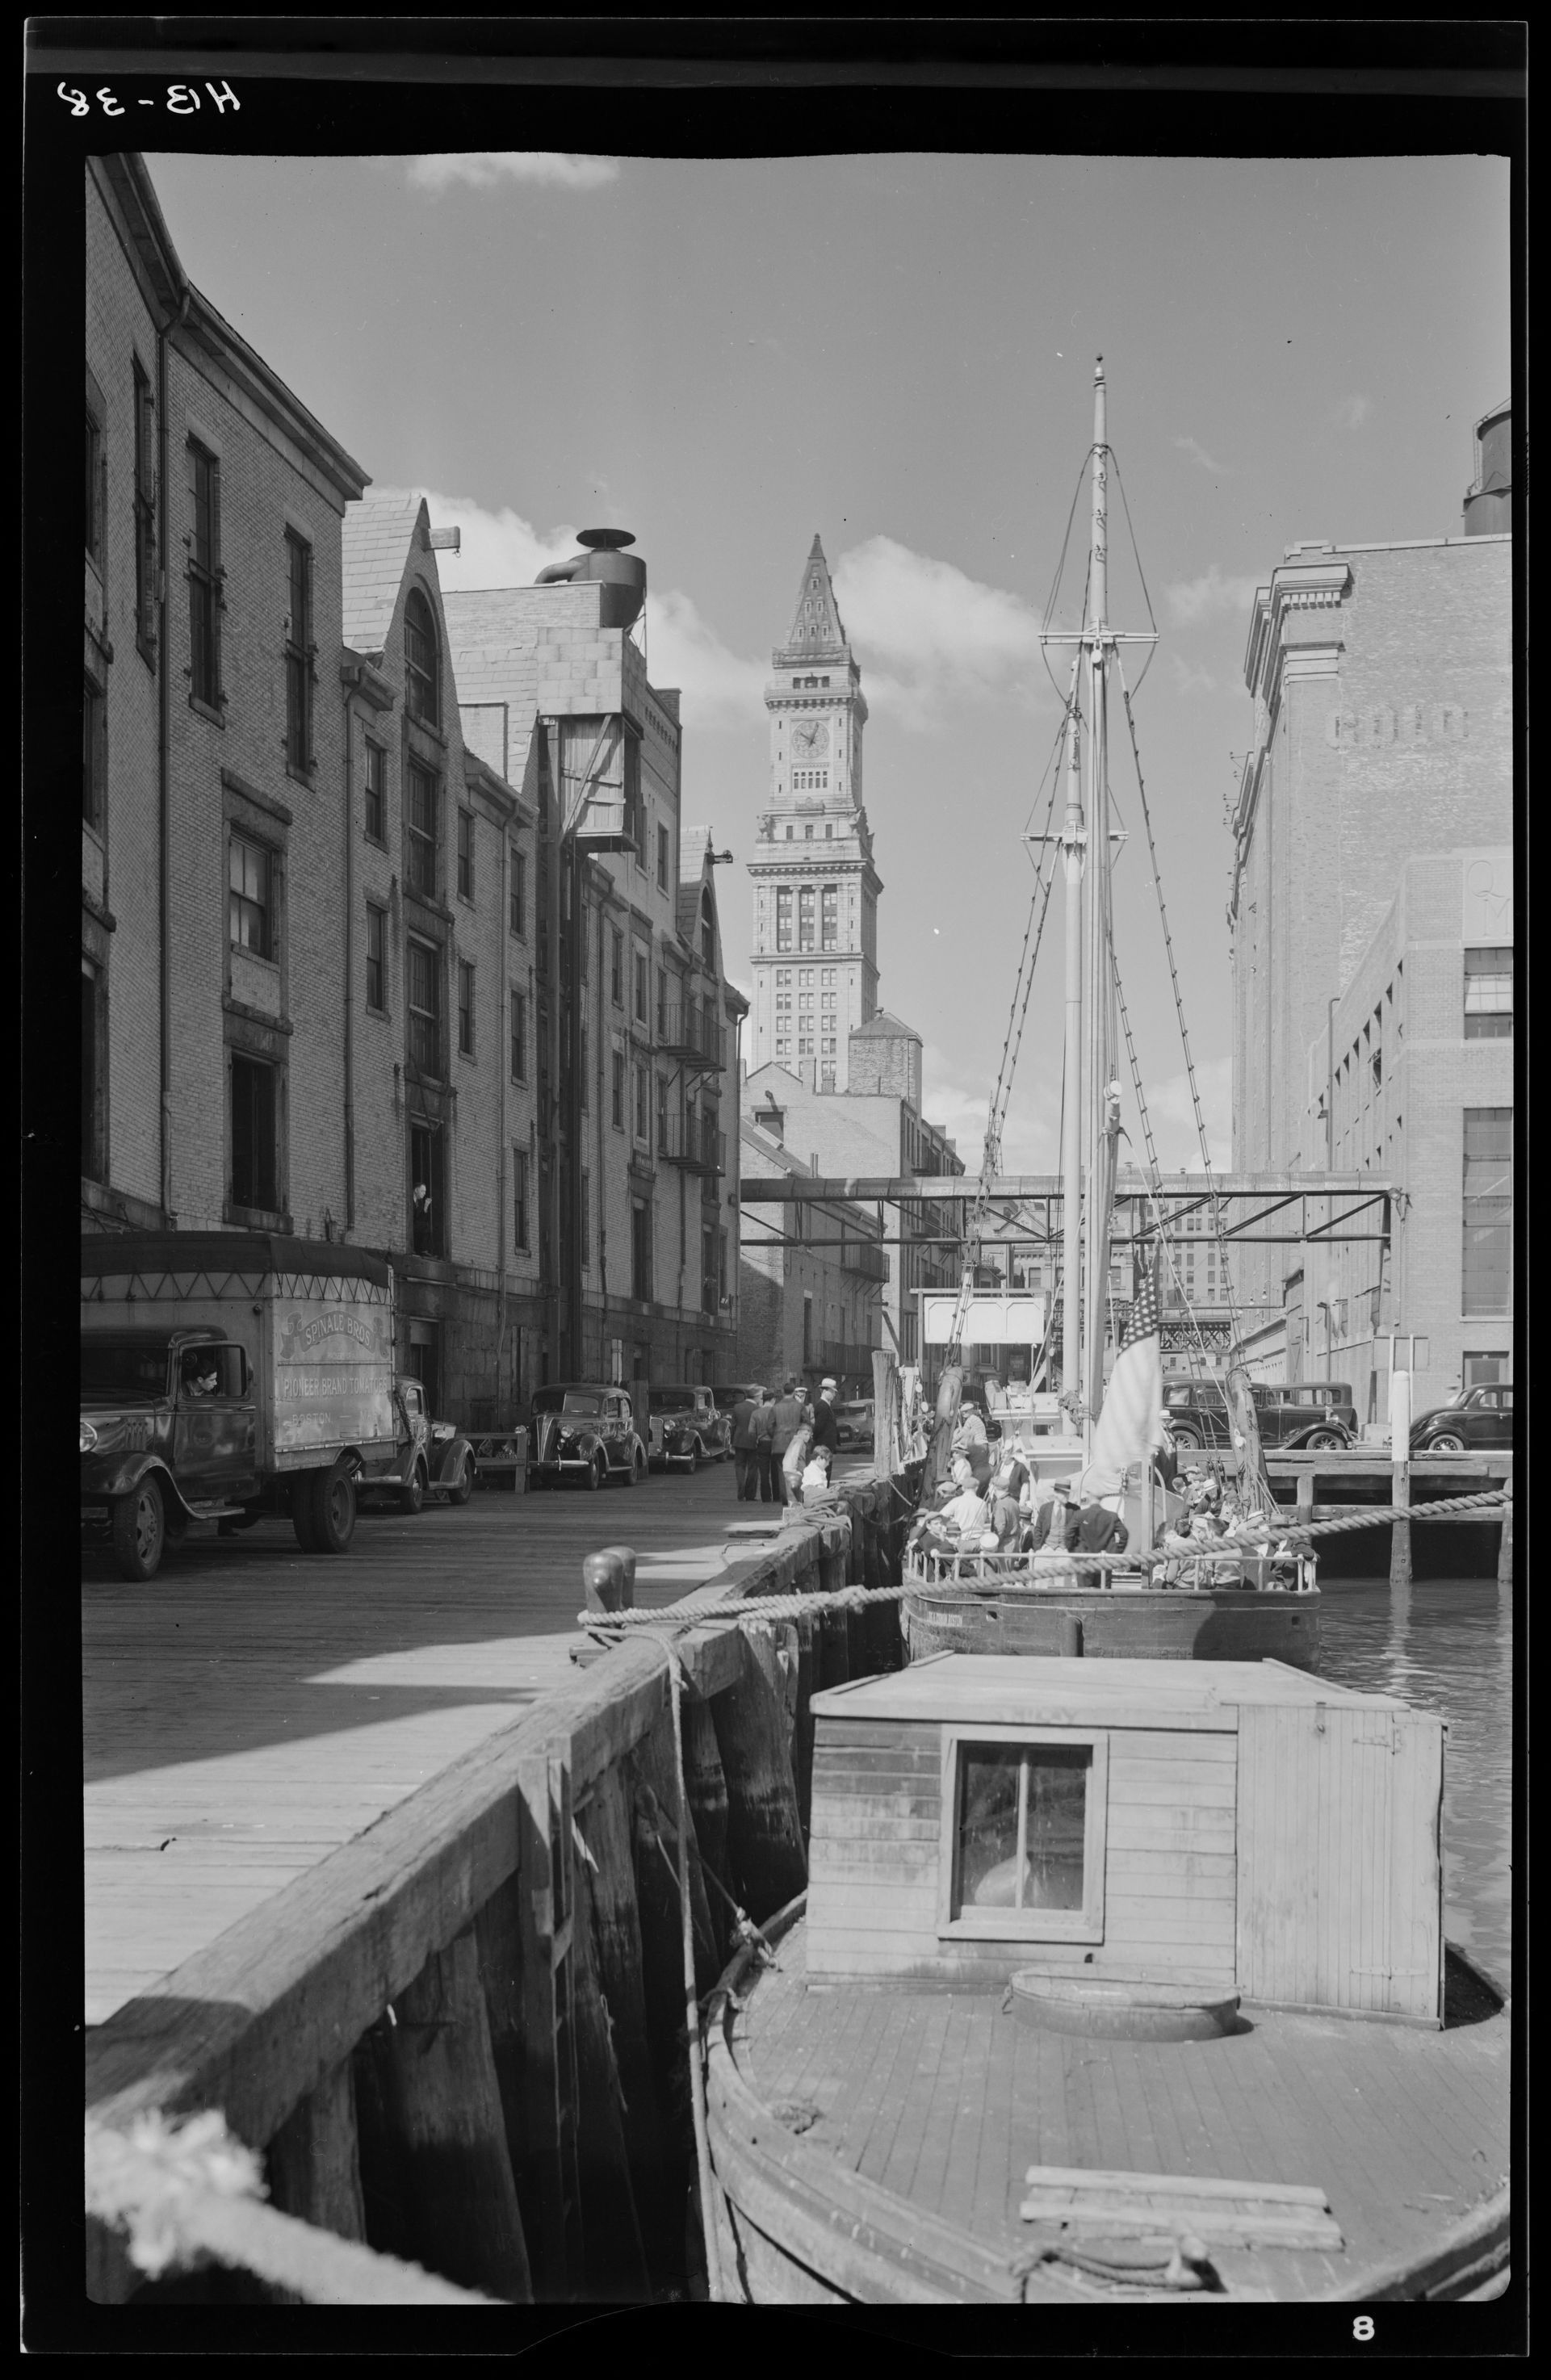 Photo from between 1928 and 1938 showing the Custom House Tower from the end of a busy long wharf